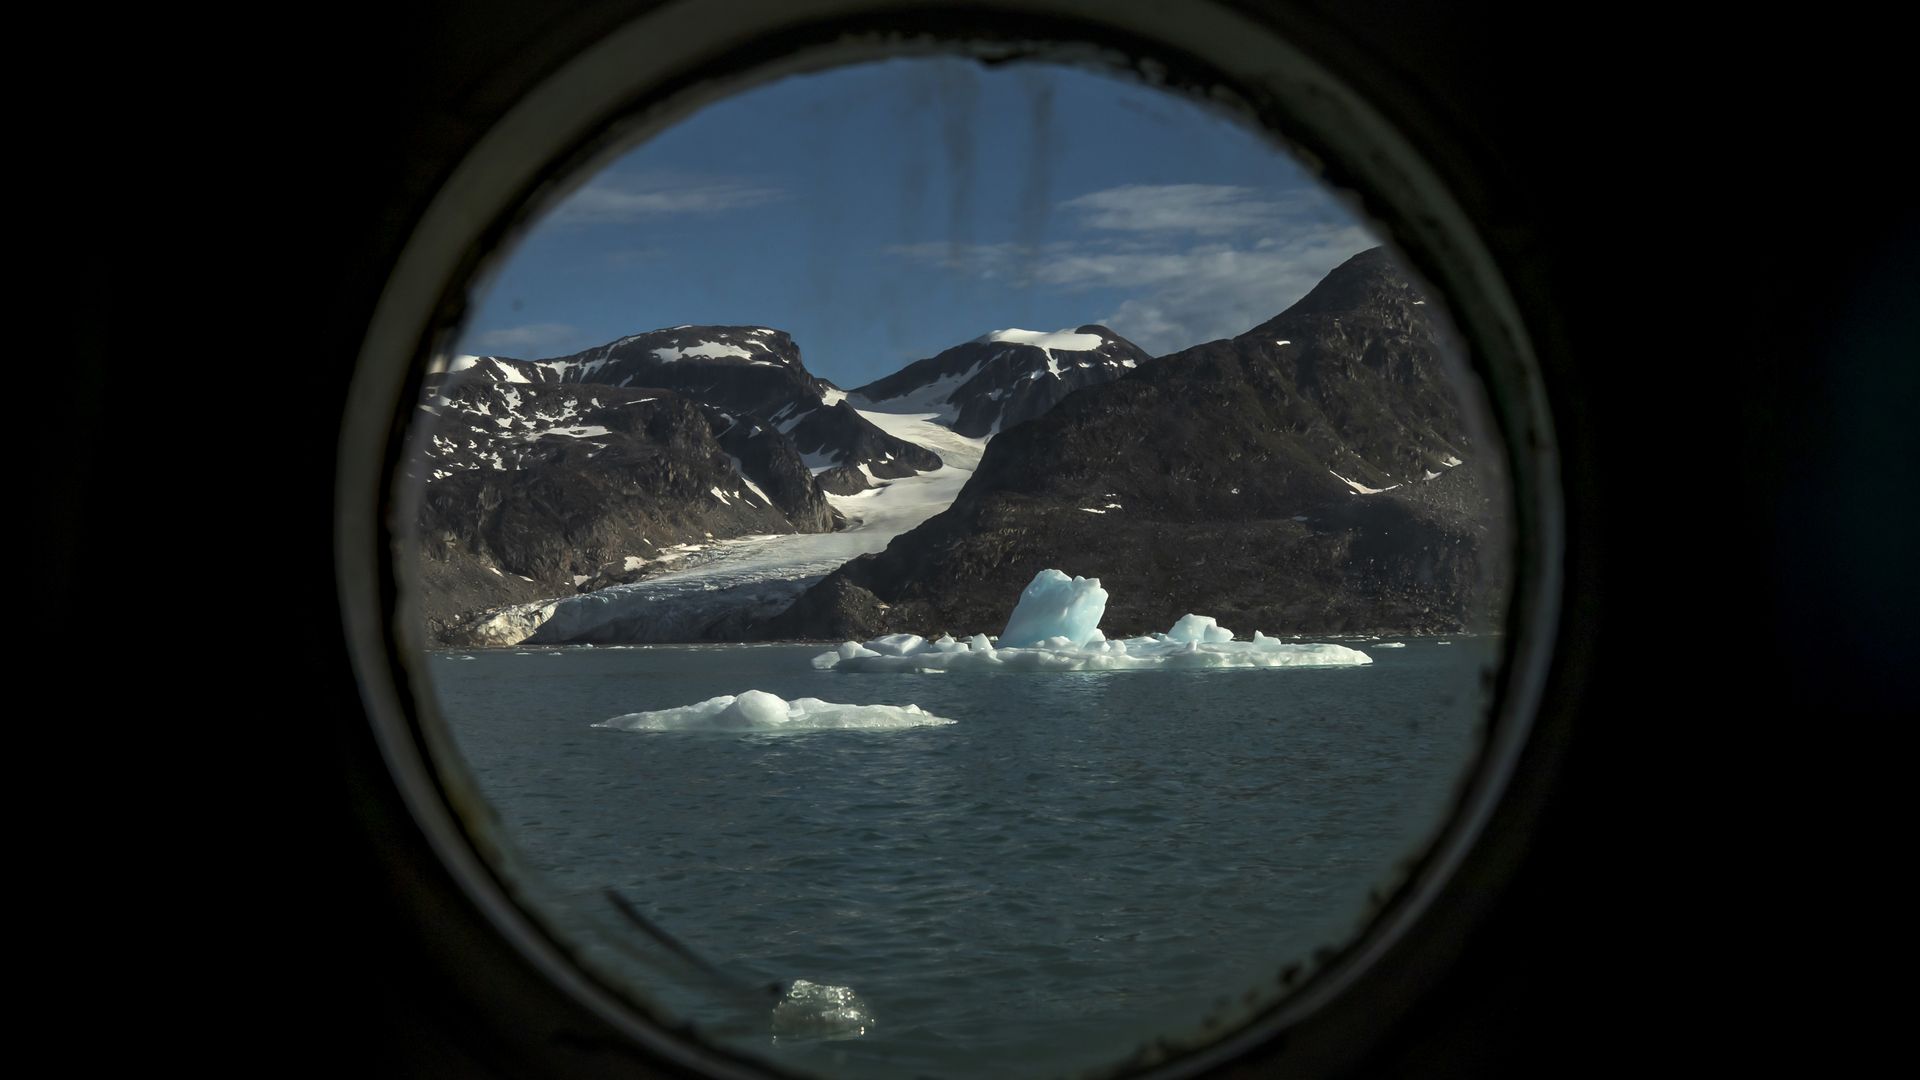 The Svalbard Islands, in Norway, viewed through a porthole of a ship in the Arctic Ocean in July 2022.